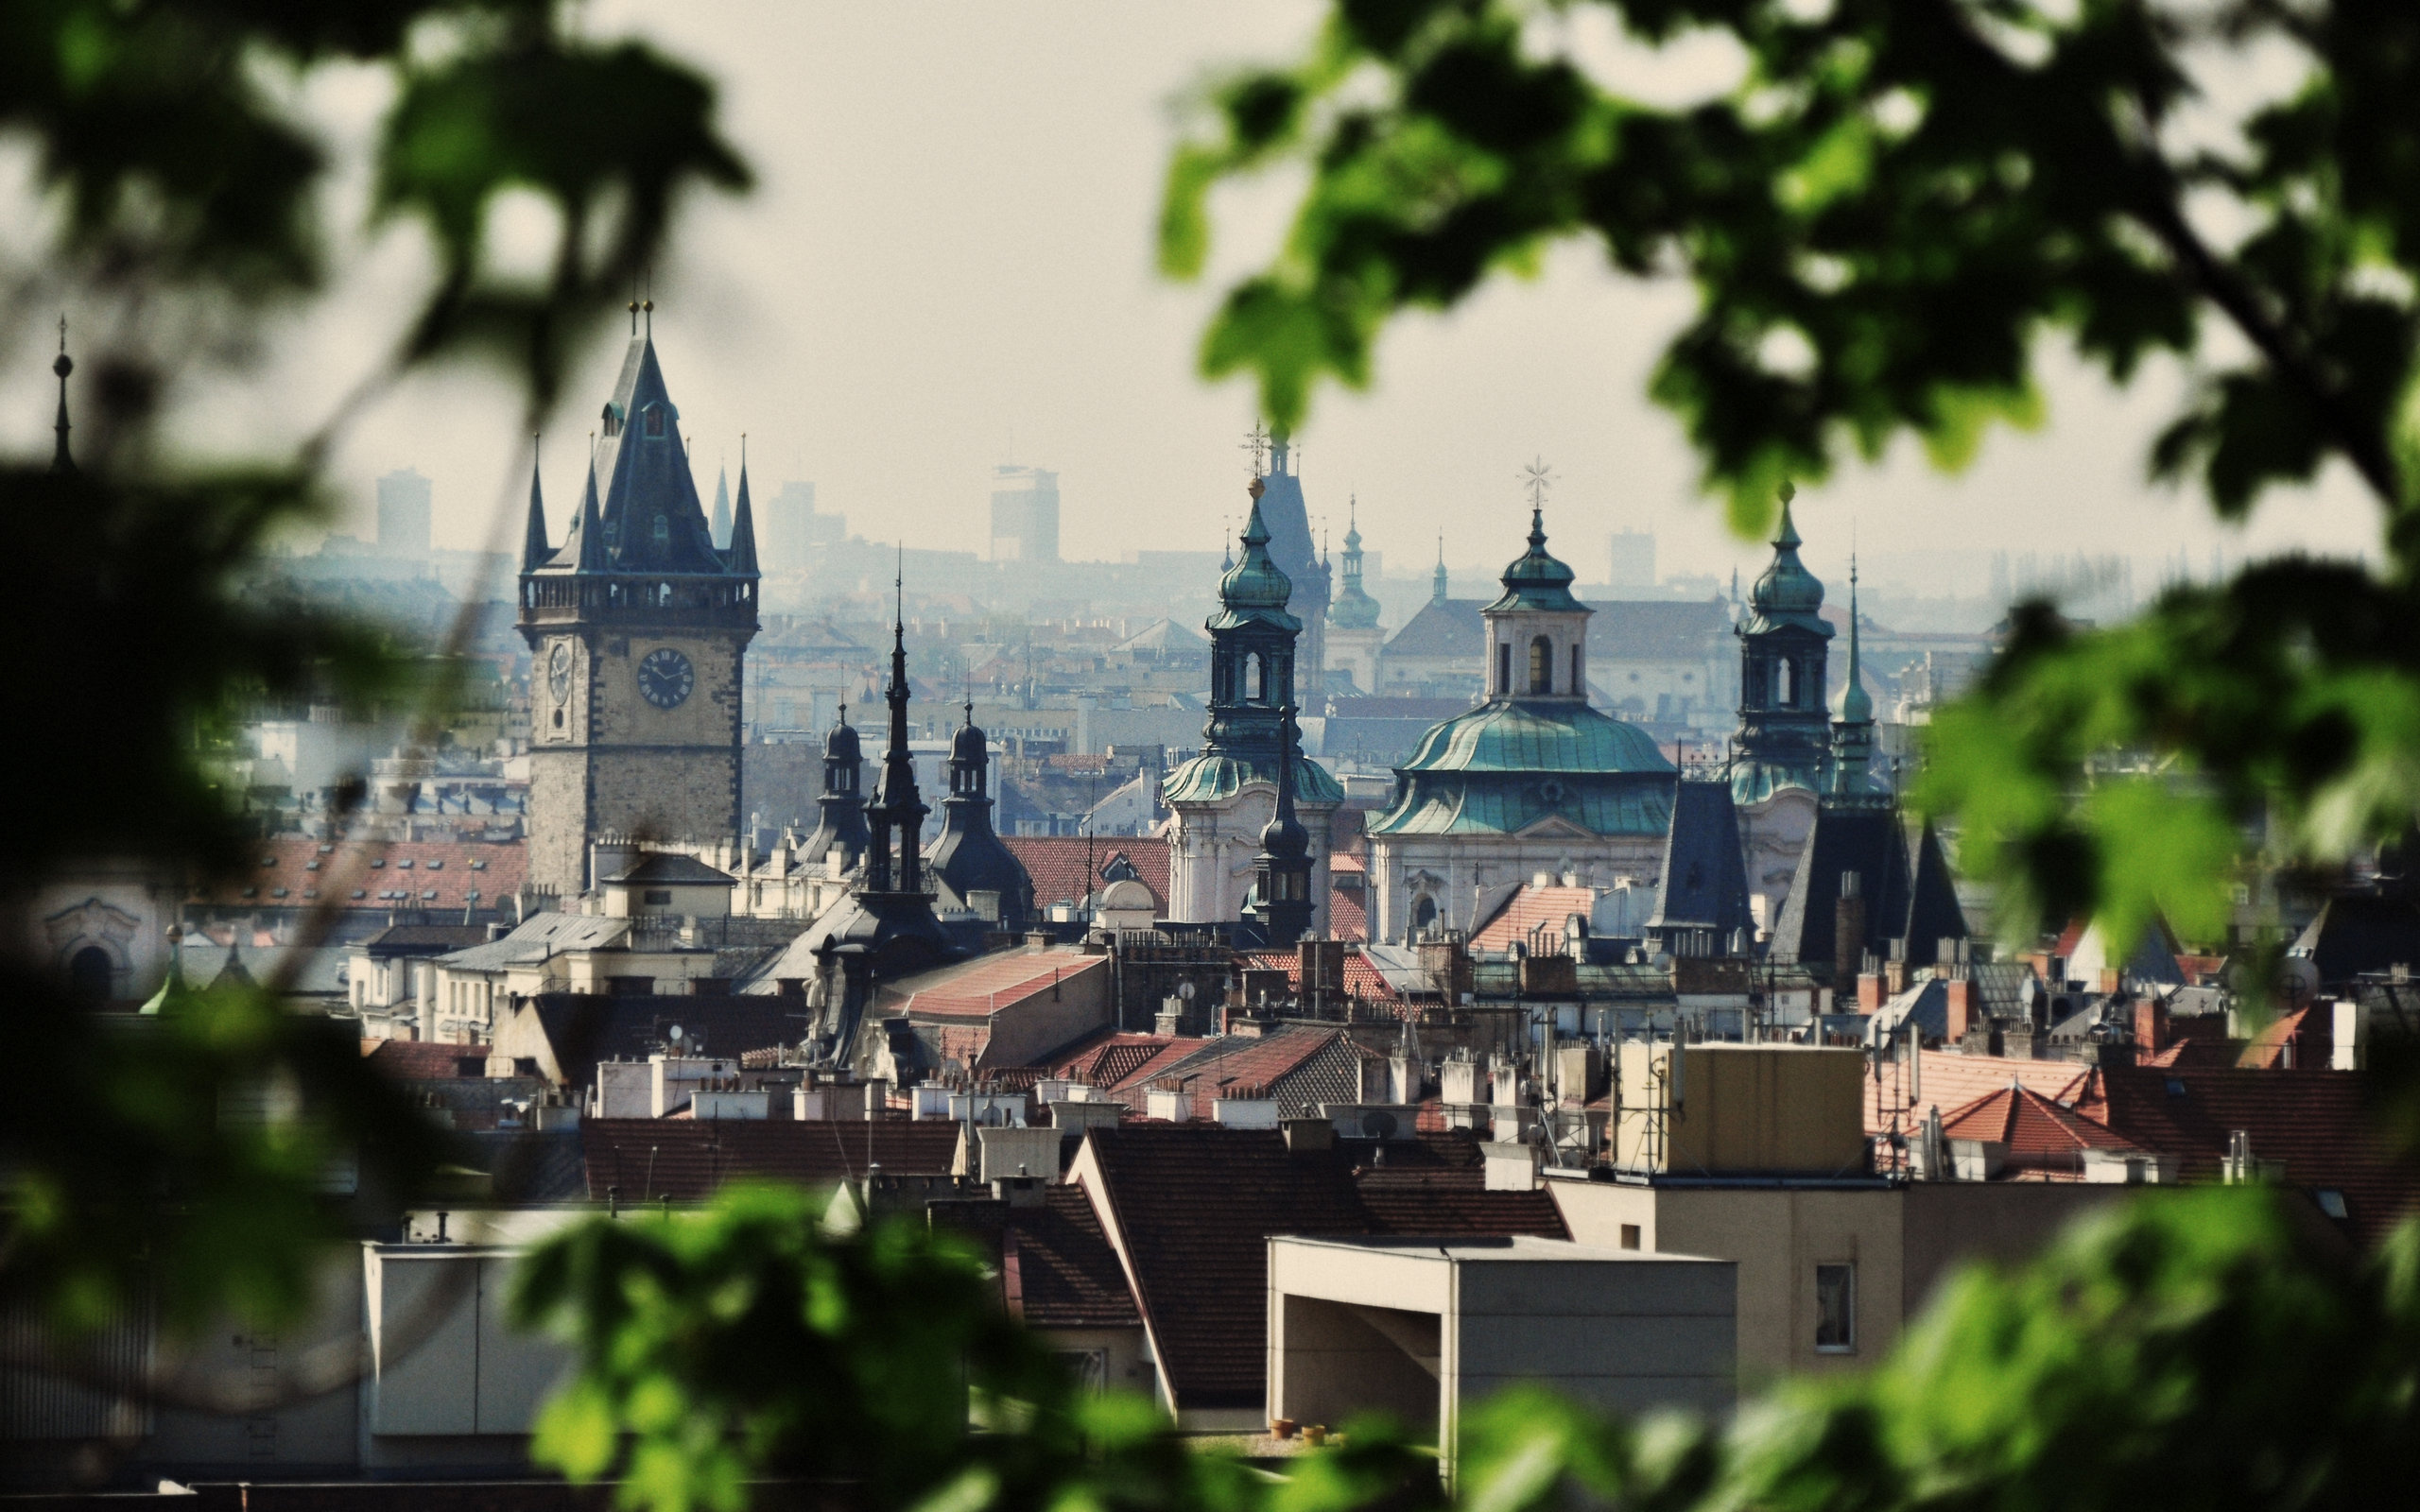 Prague: Often referred to as the "City of a Hundred Spires". 2560x1600 HD Wallpaper.